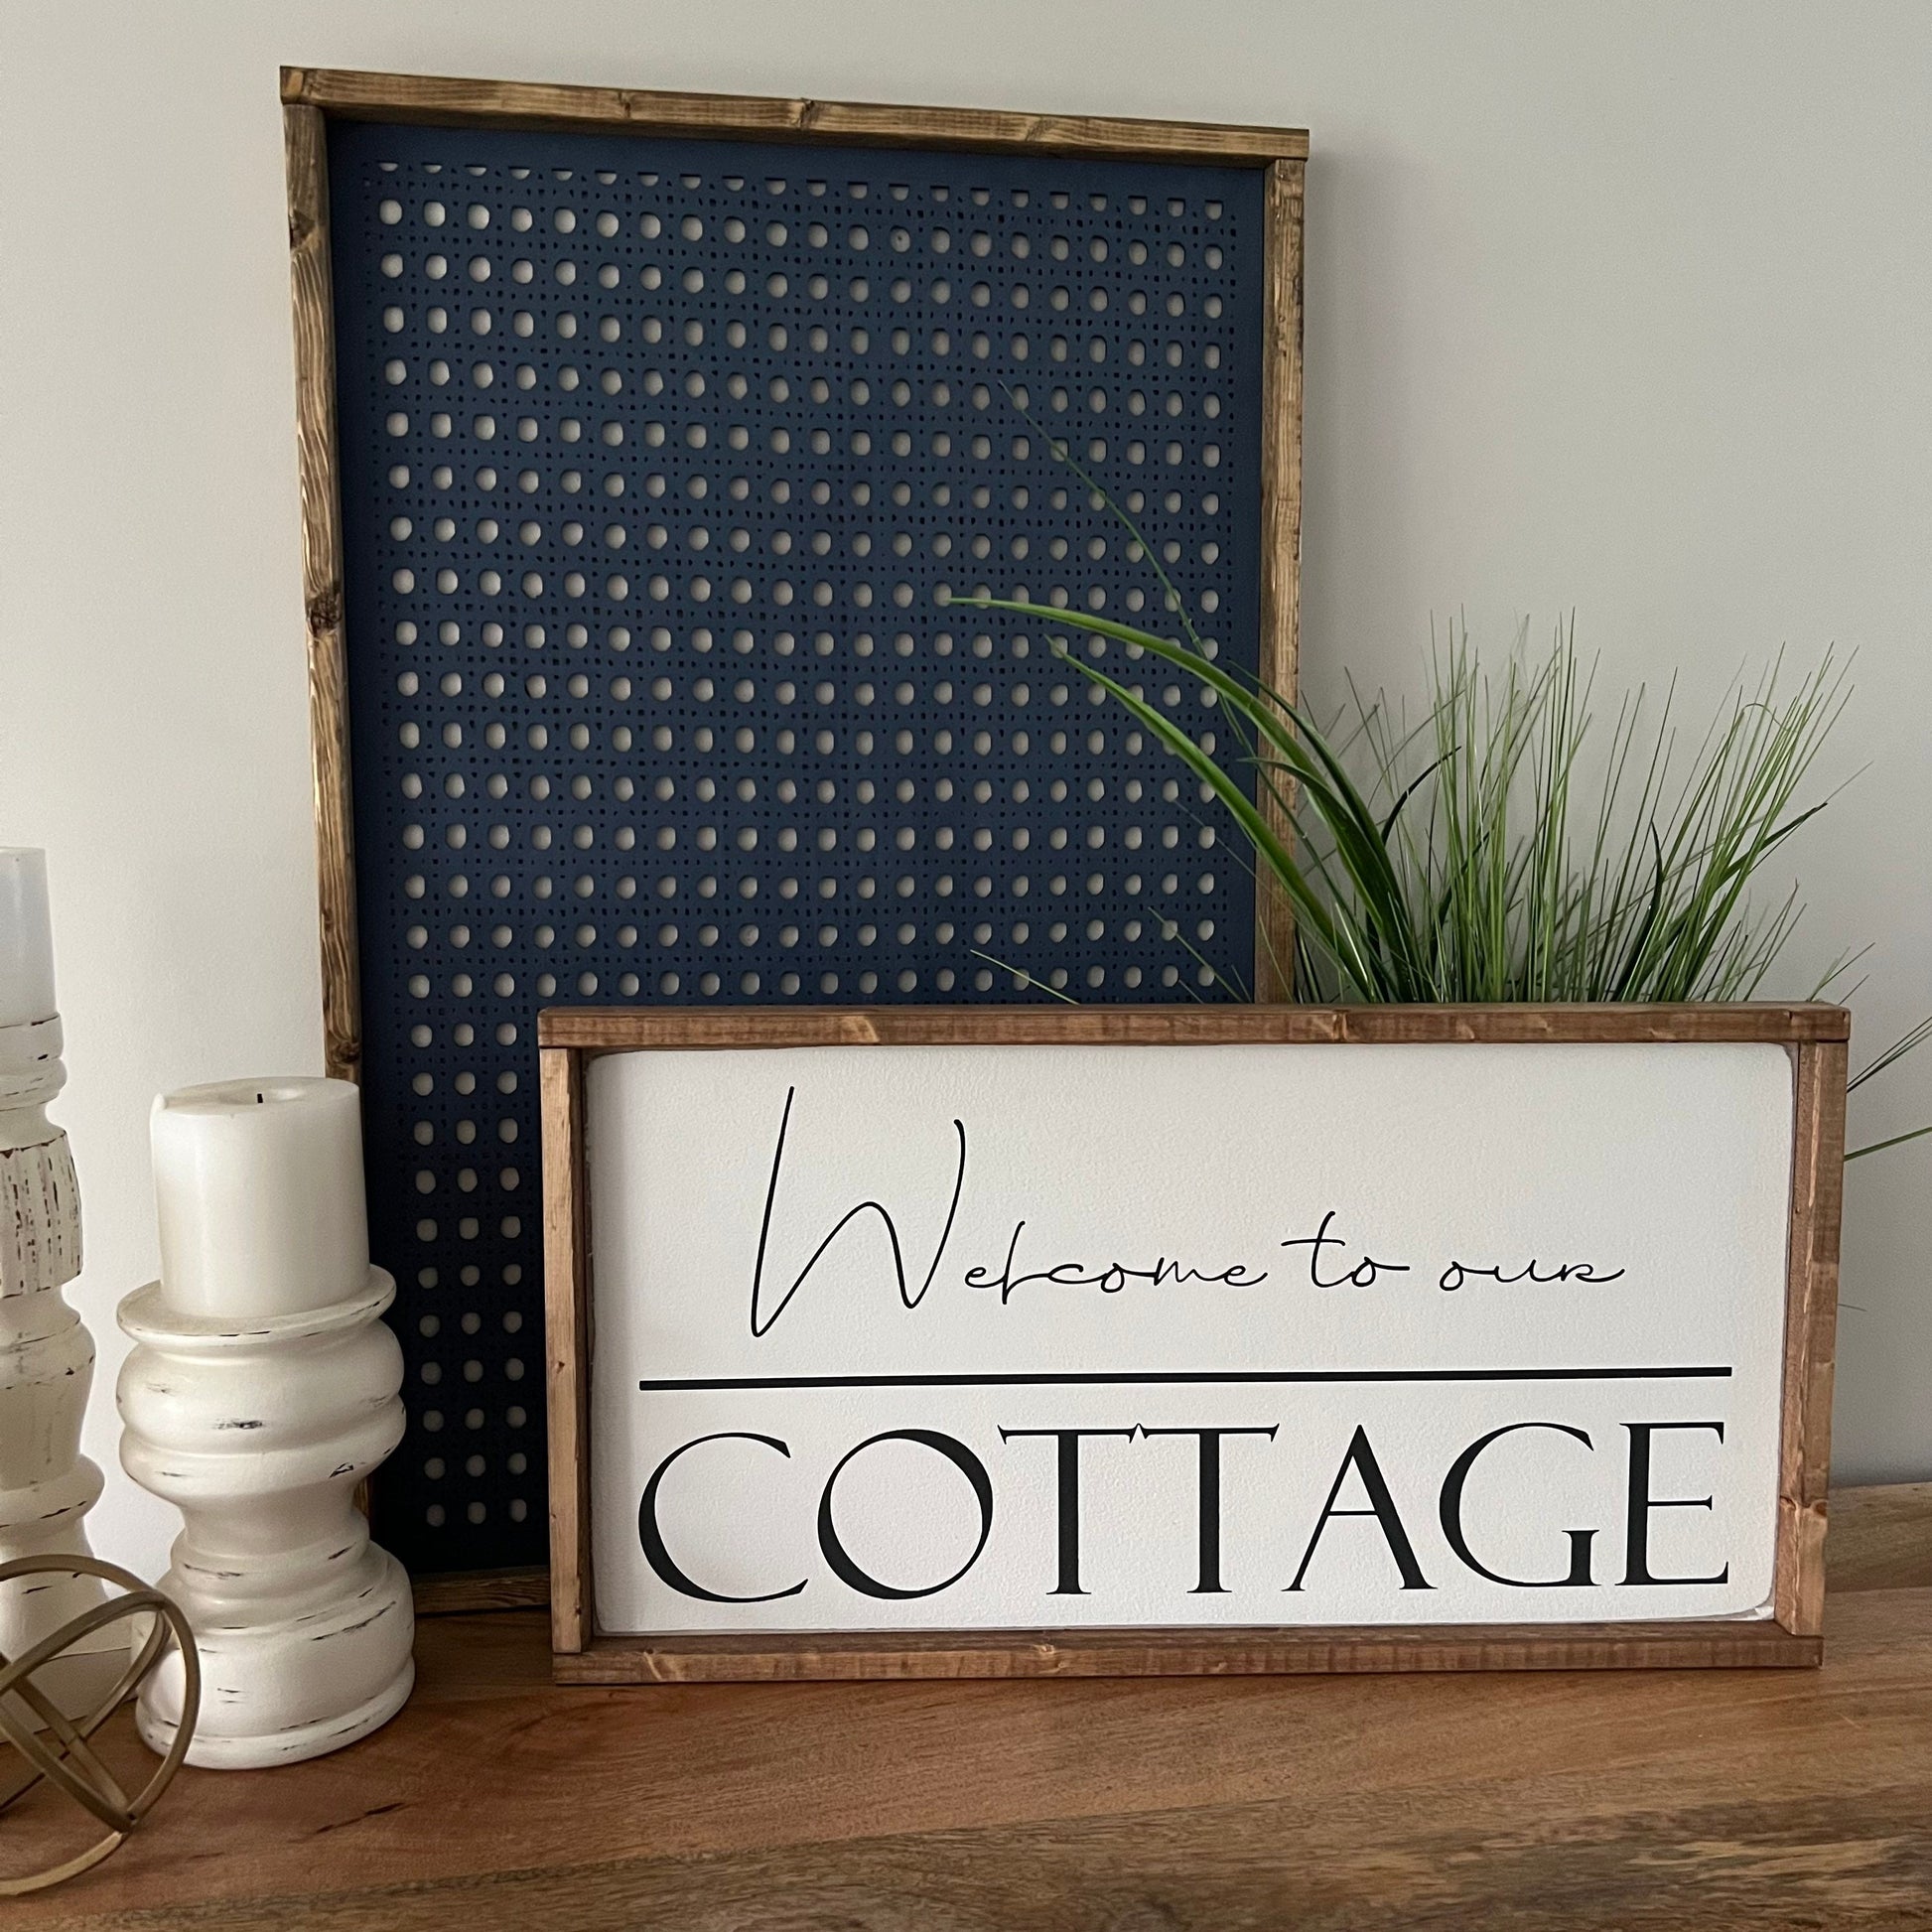 welcome to our cottage - wood sign decor [FREE SHIPPING!]